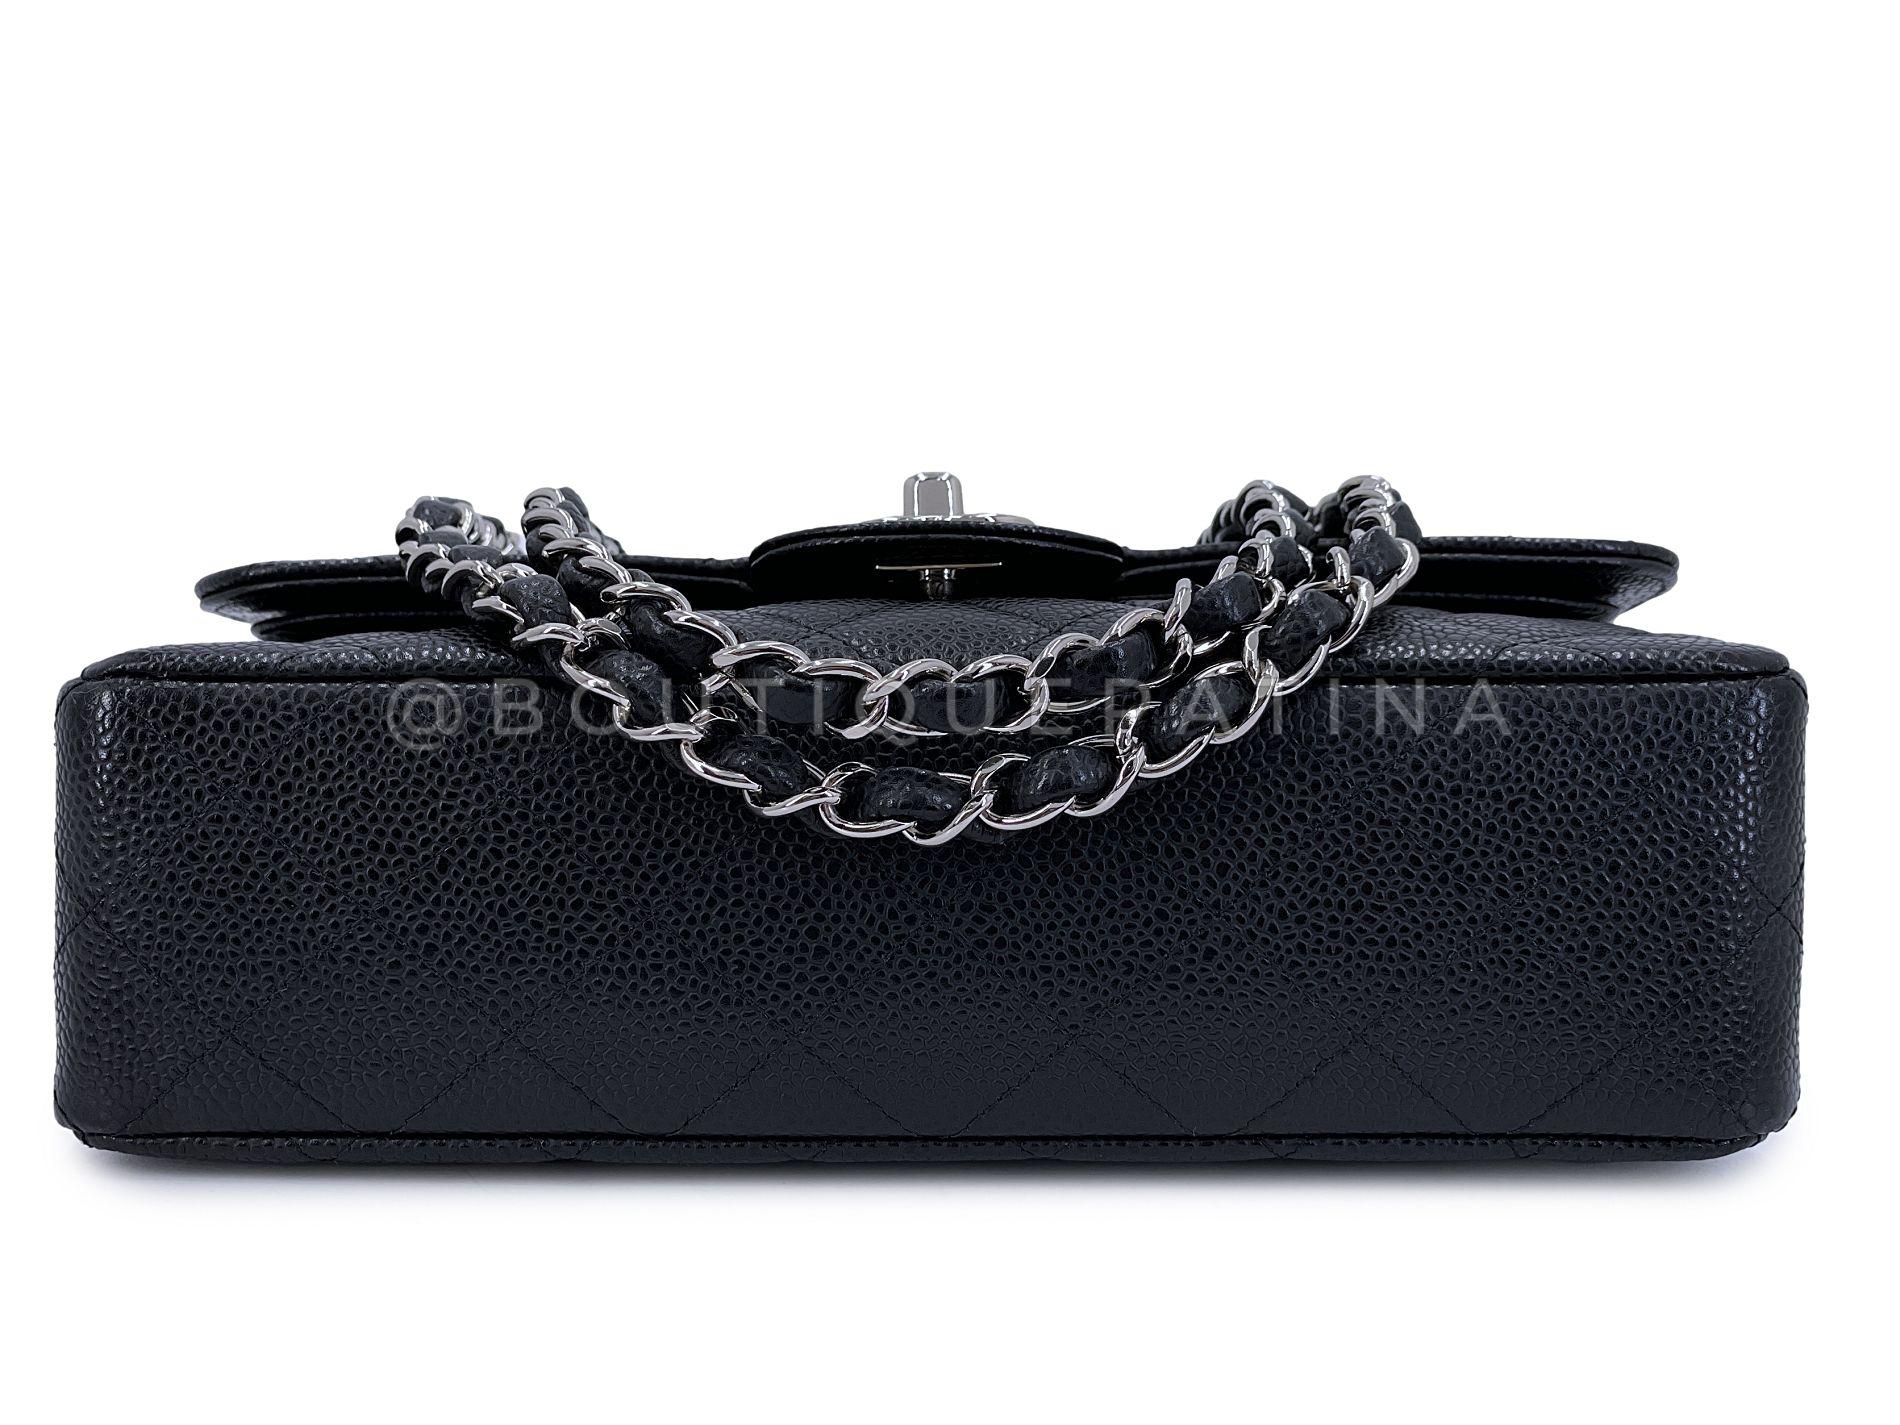 Chanel Black Caviar Small Classic Double Flap Bag SHW 67981 For Sale 2